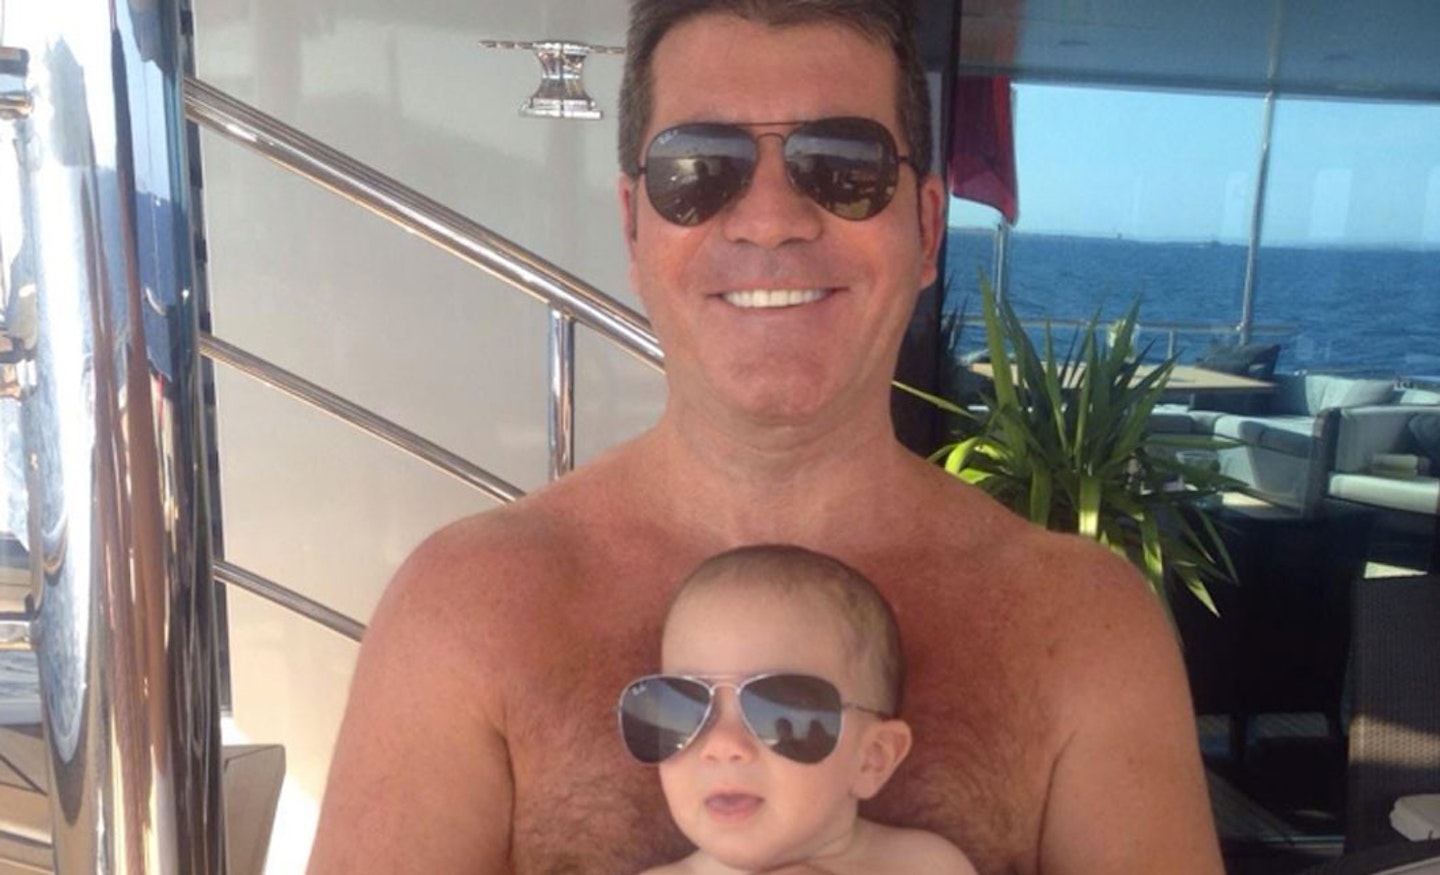 SImon and son Eric in matching sunnies